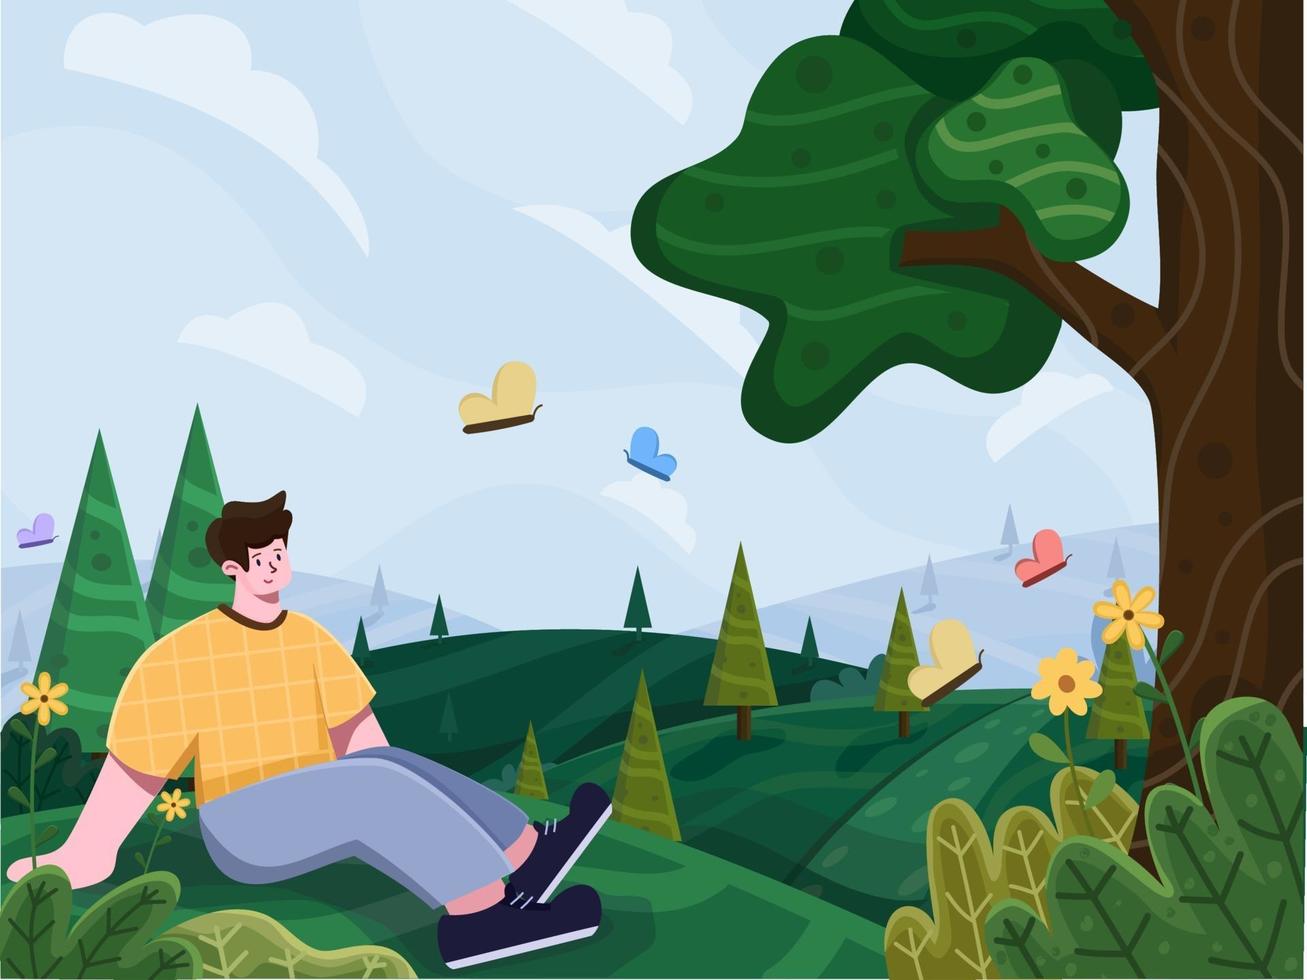 Spring hill landscape illustration with floral, grass, butterfly, and people relax enjoying spring season. Nature landscape spring background, village, people picnic on vacation. Suitable for Postcard, Greeting card, banner, poster, flyer. vector